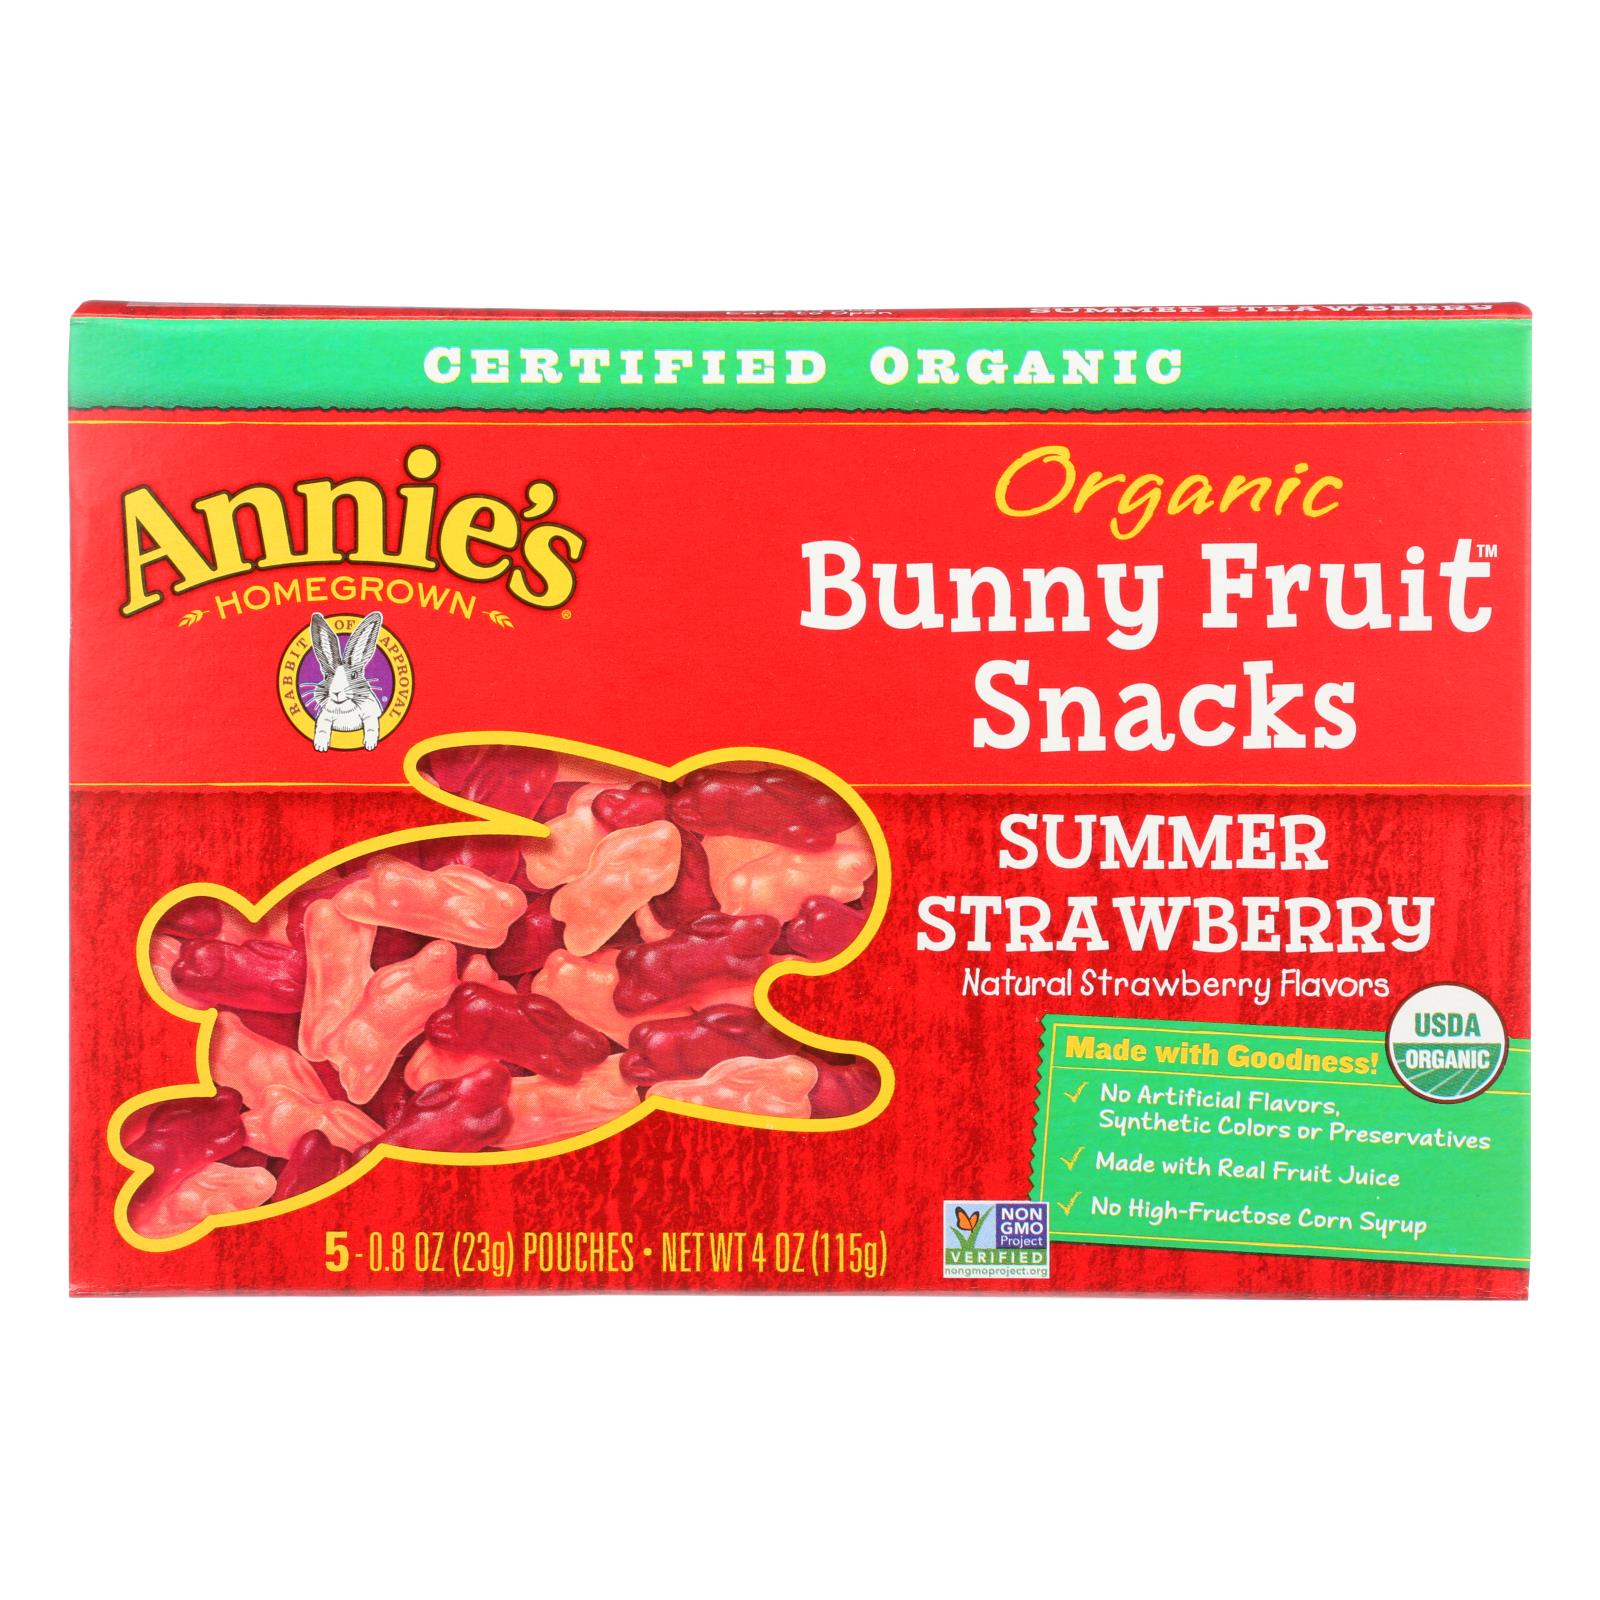 Annie'S Homegrown, Annie'S Homegrown Fruit Snack Summer Strawberry - Case Of 10 - 4 Oz (Pack of 10)